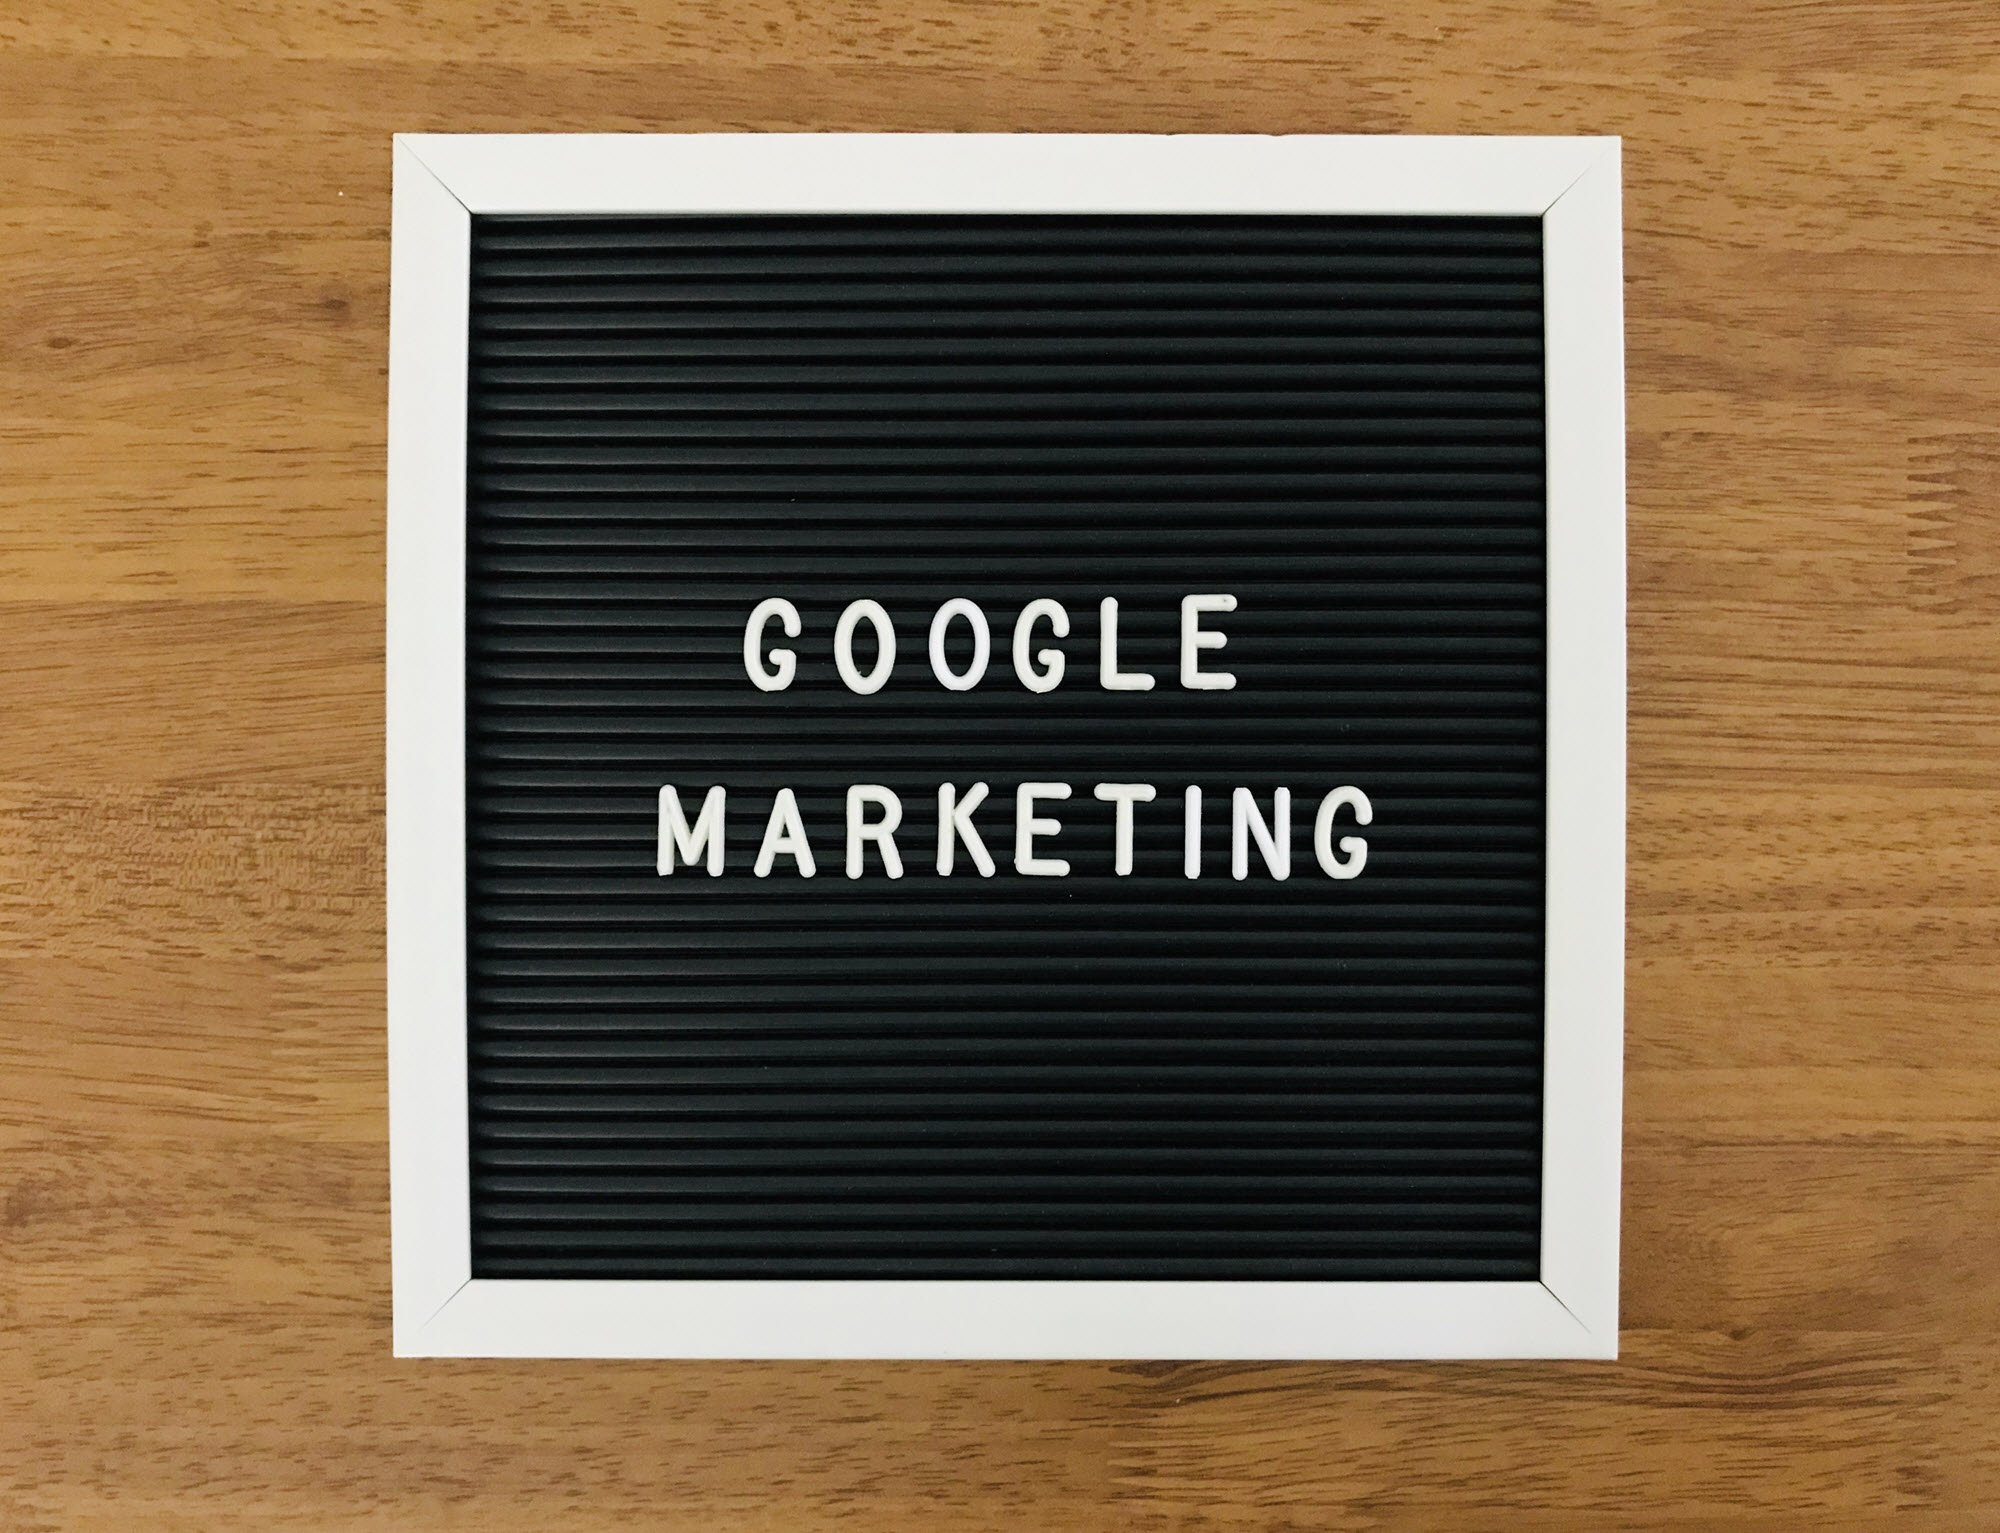 Sign that says Google Marketing